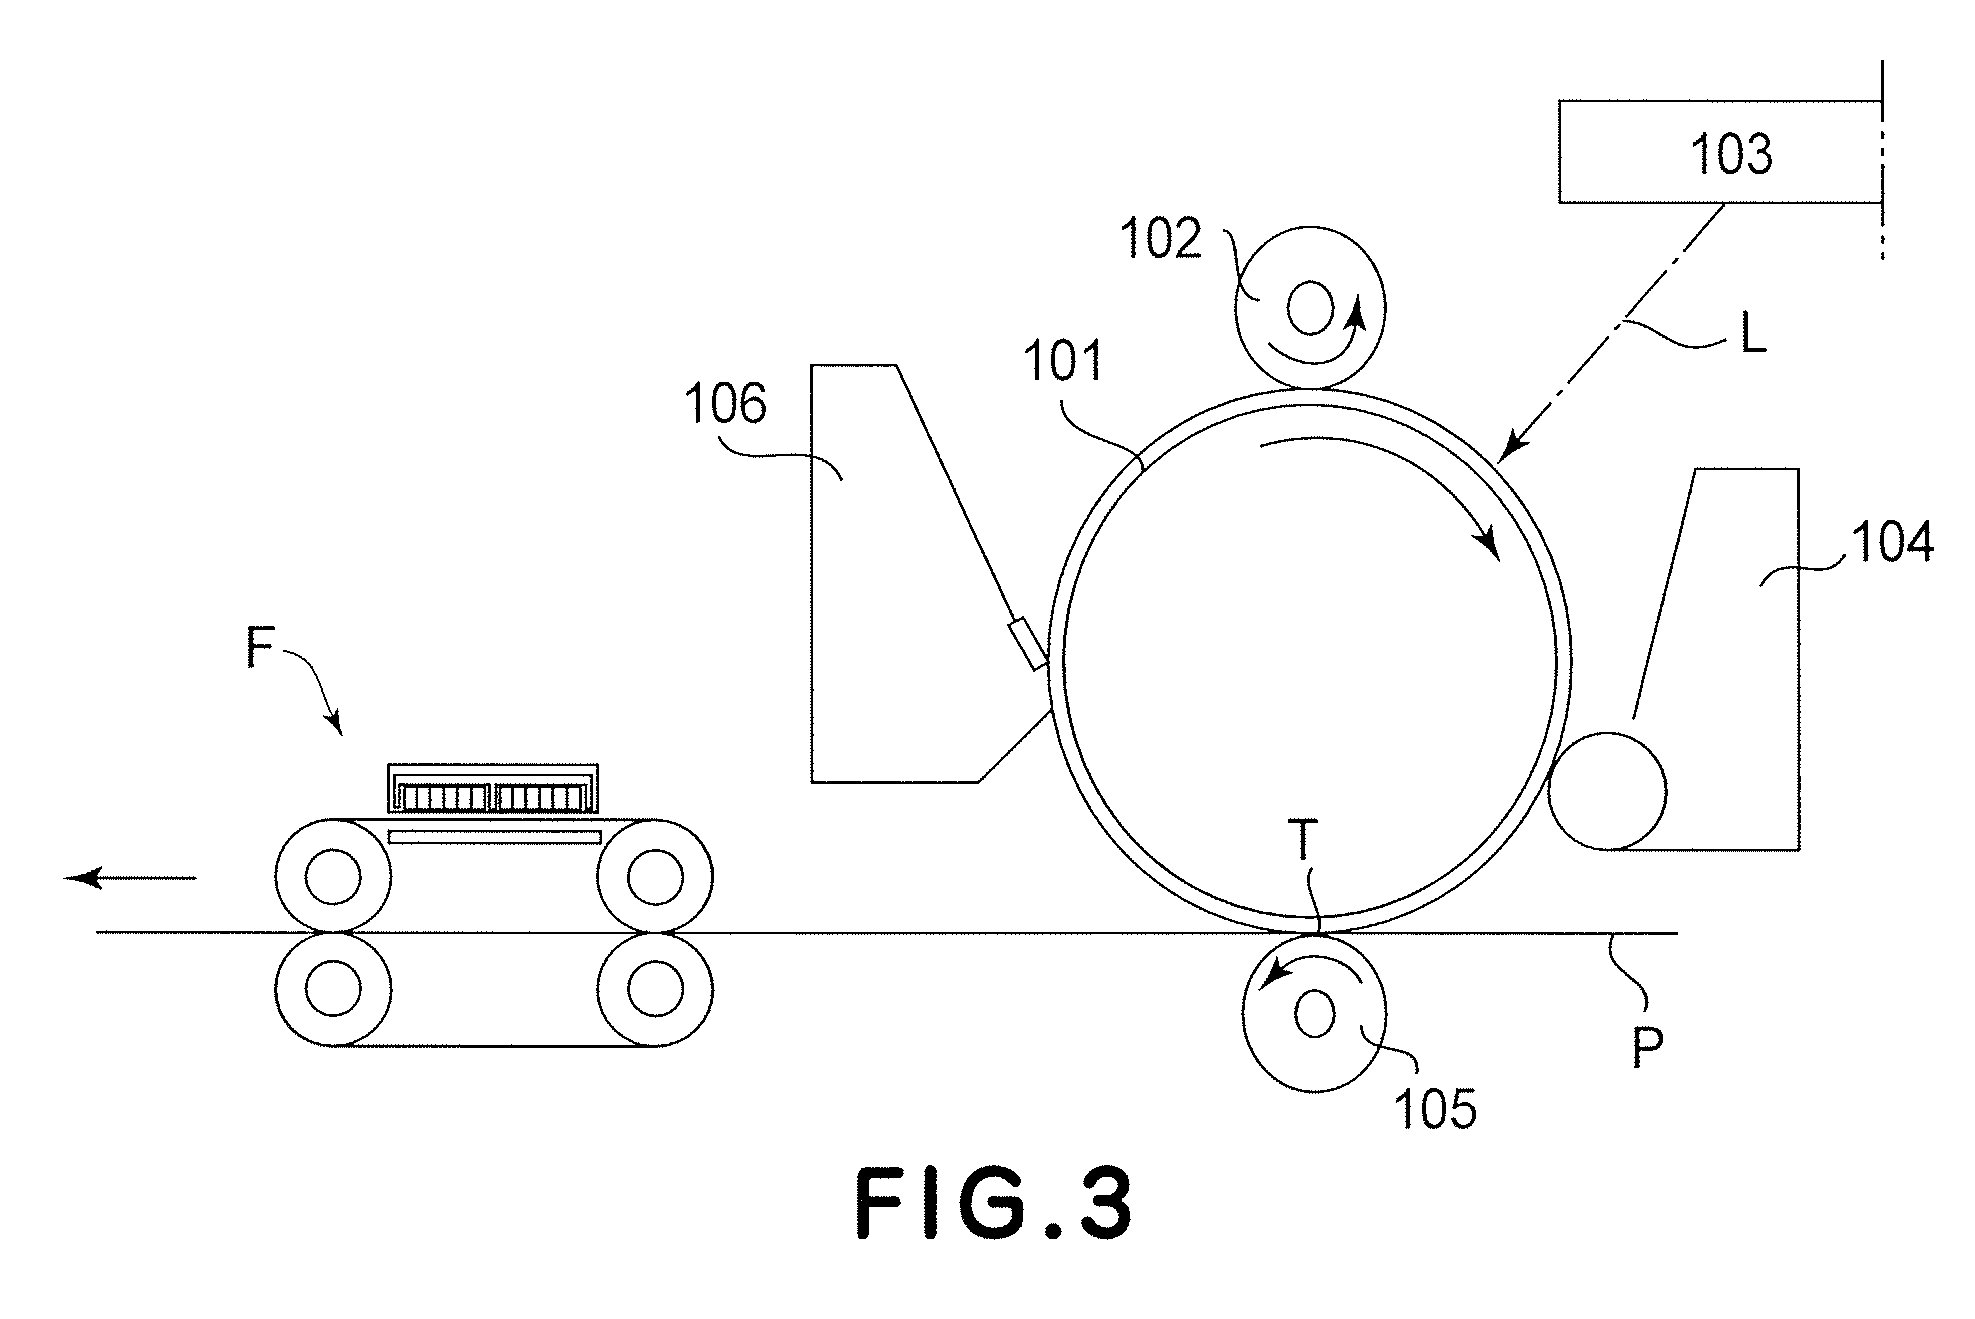 Image heating apparatus including a belt member for heating an image on a recording material